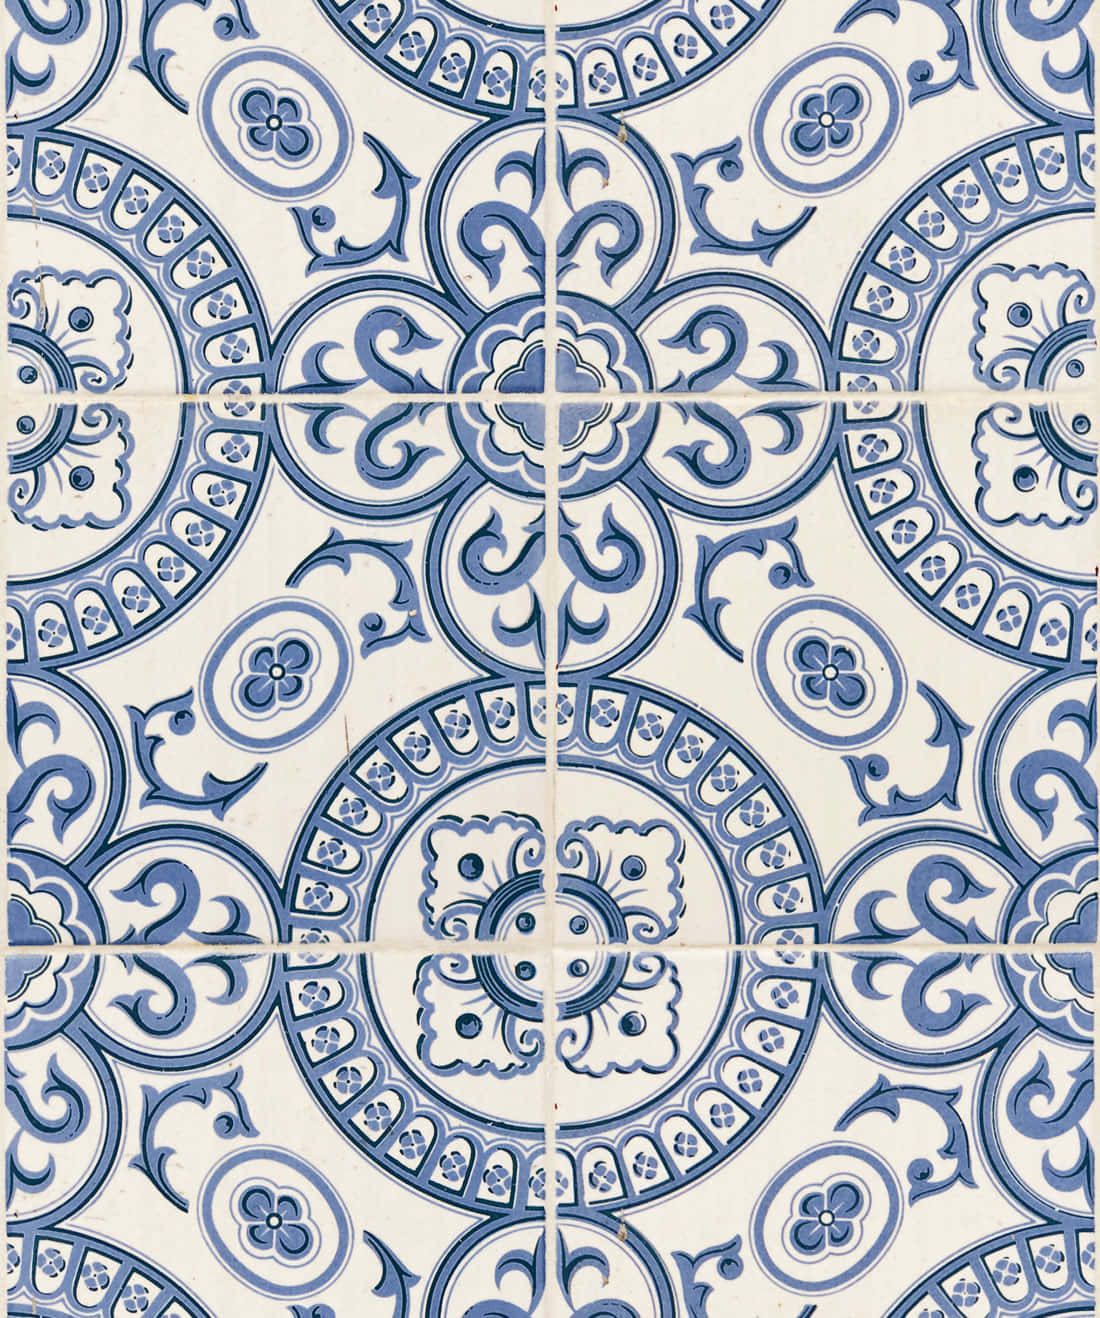 A Blue And White Tile With A Circular Design Wallpaper